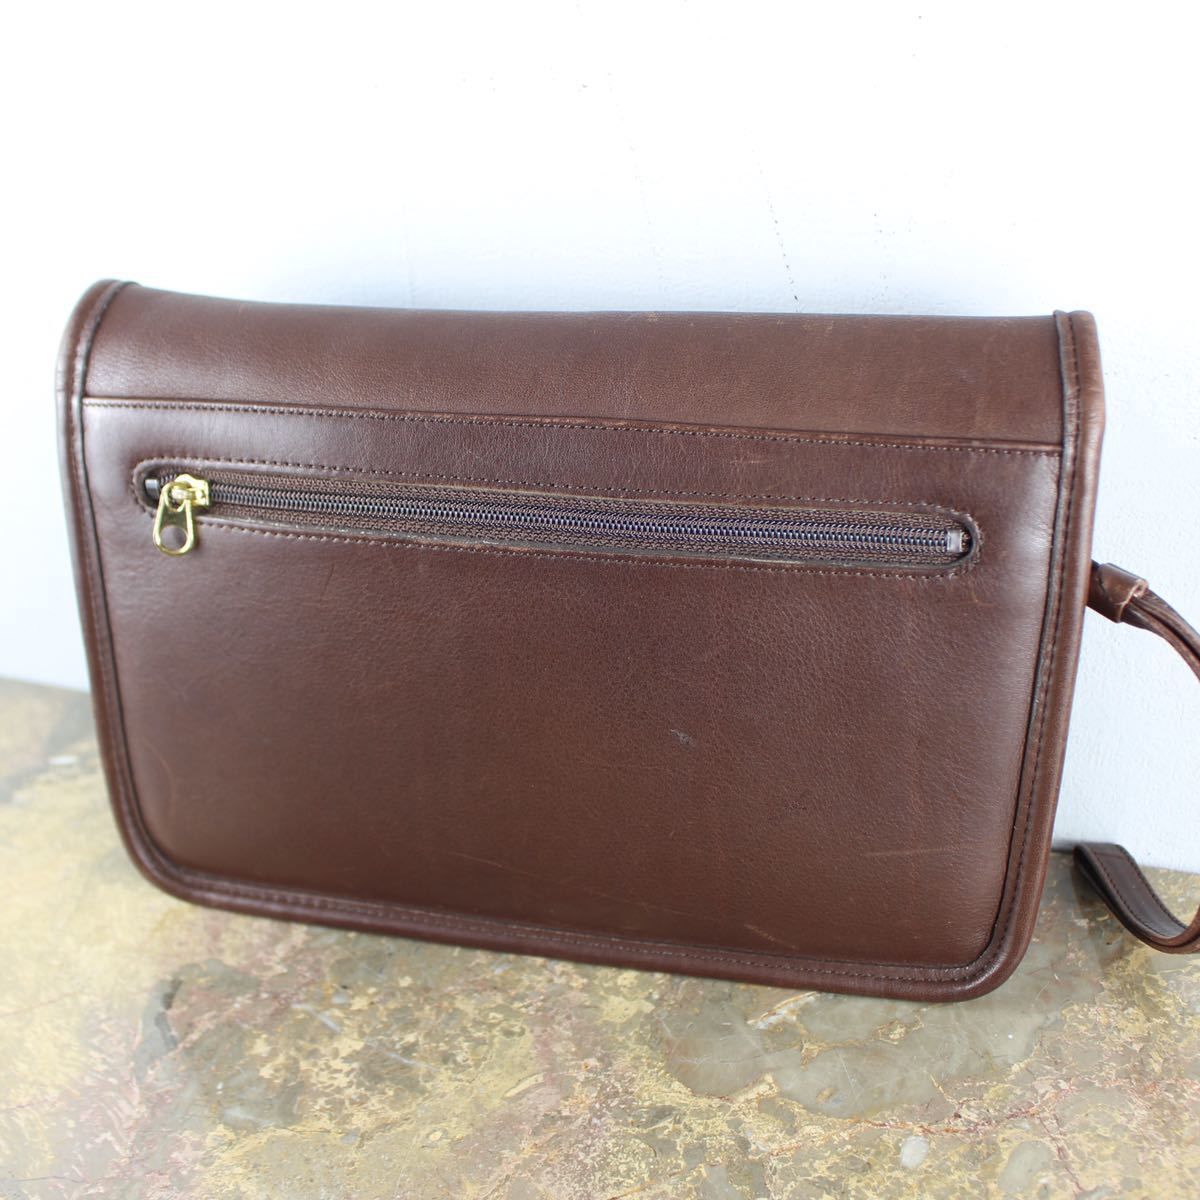 OLD COACH TURN LOCK LEATHER CLUTCH BAG MADE IN USA/オールドコーチターンロックレザークラッチバッグ_画像3